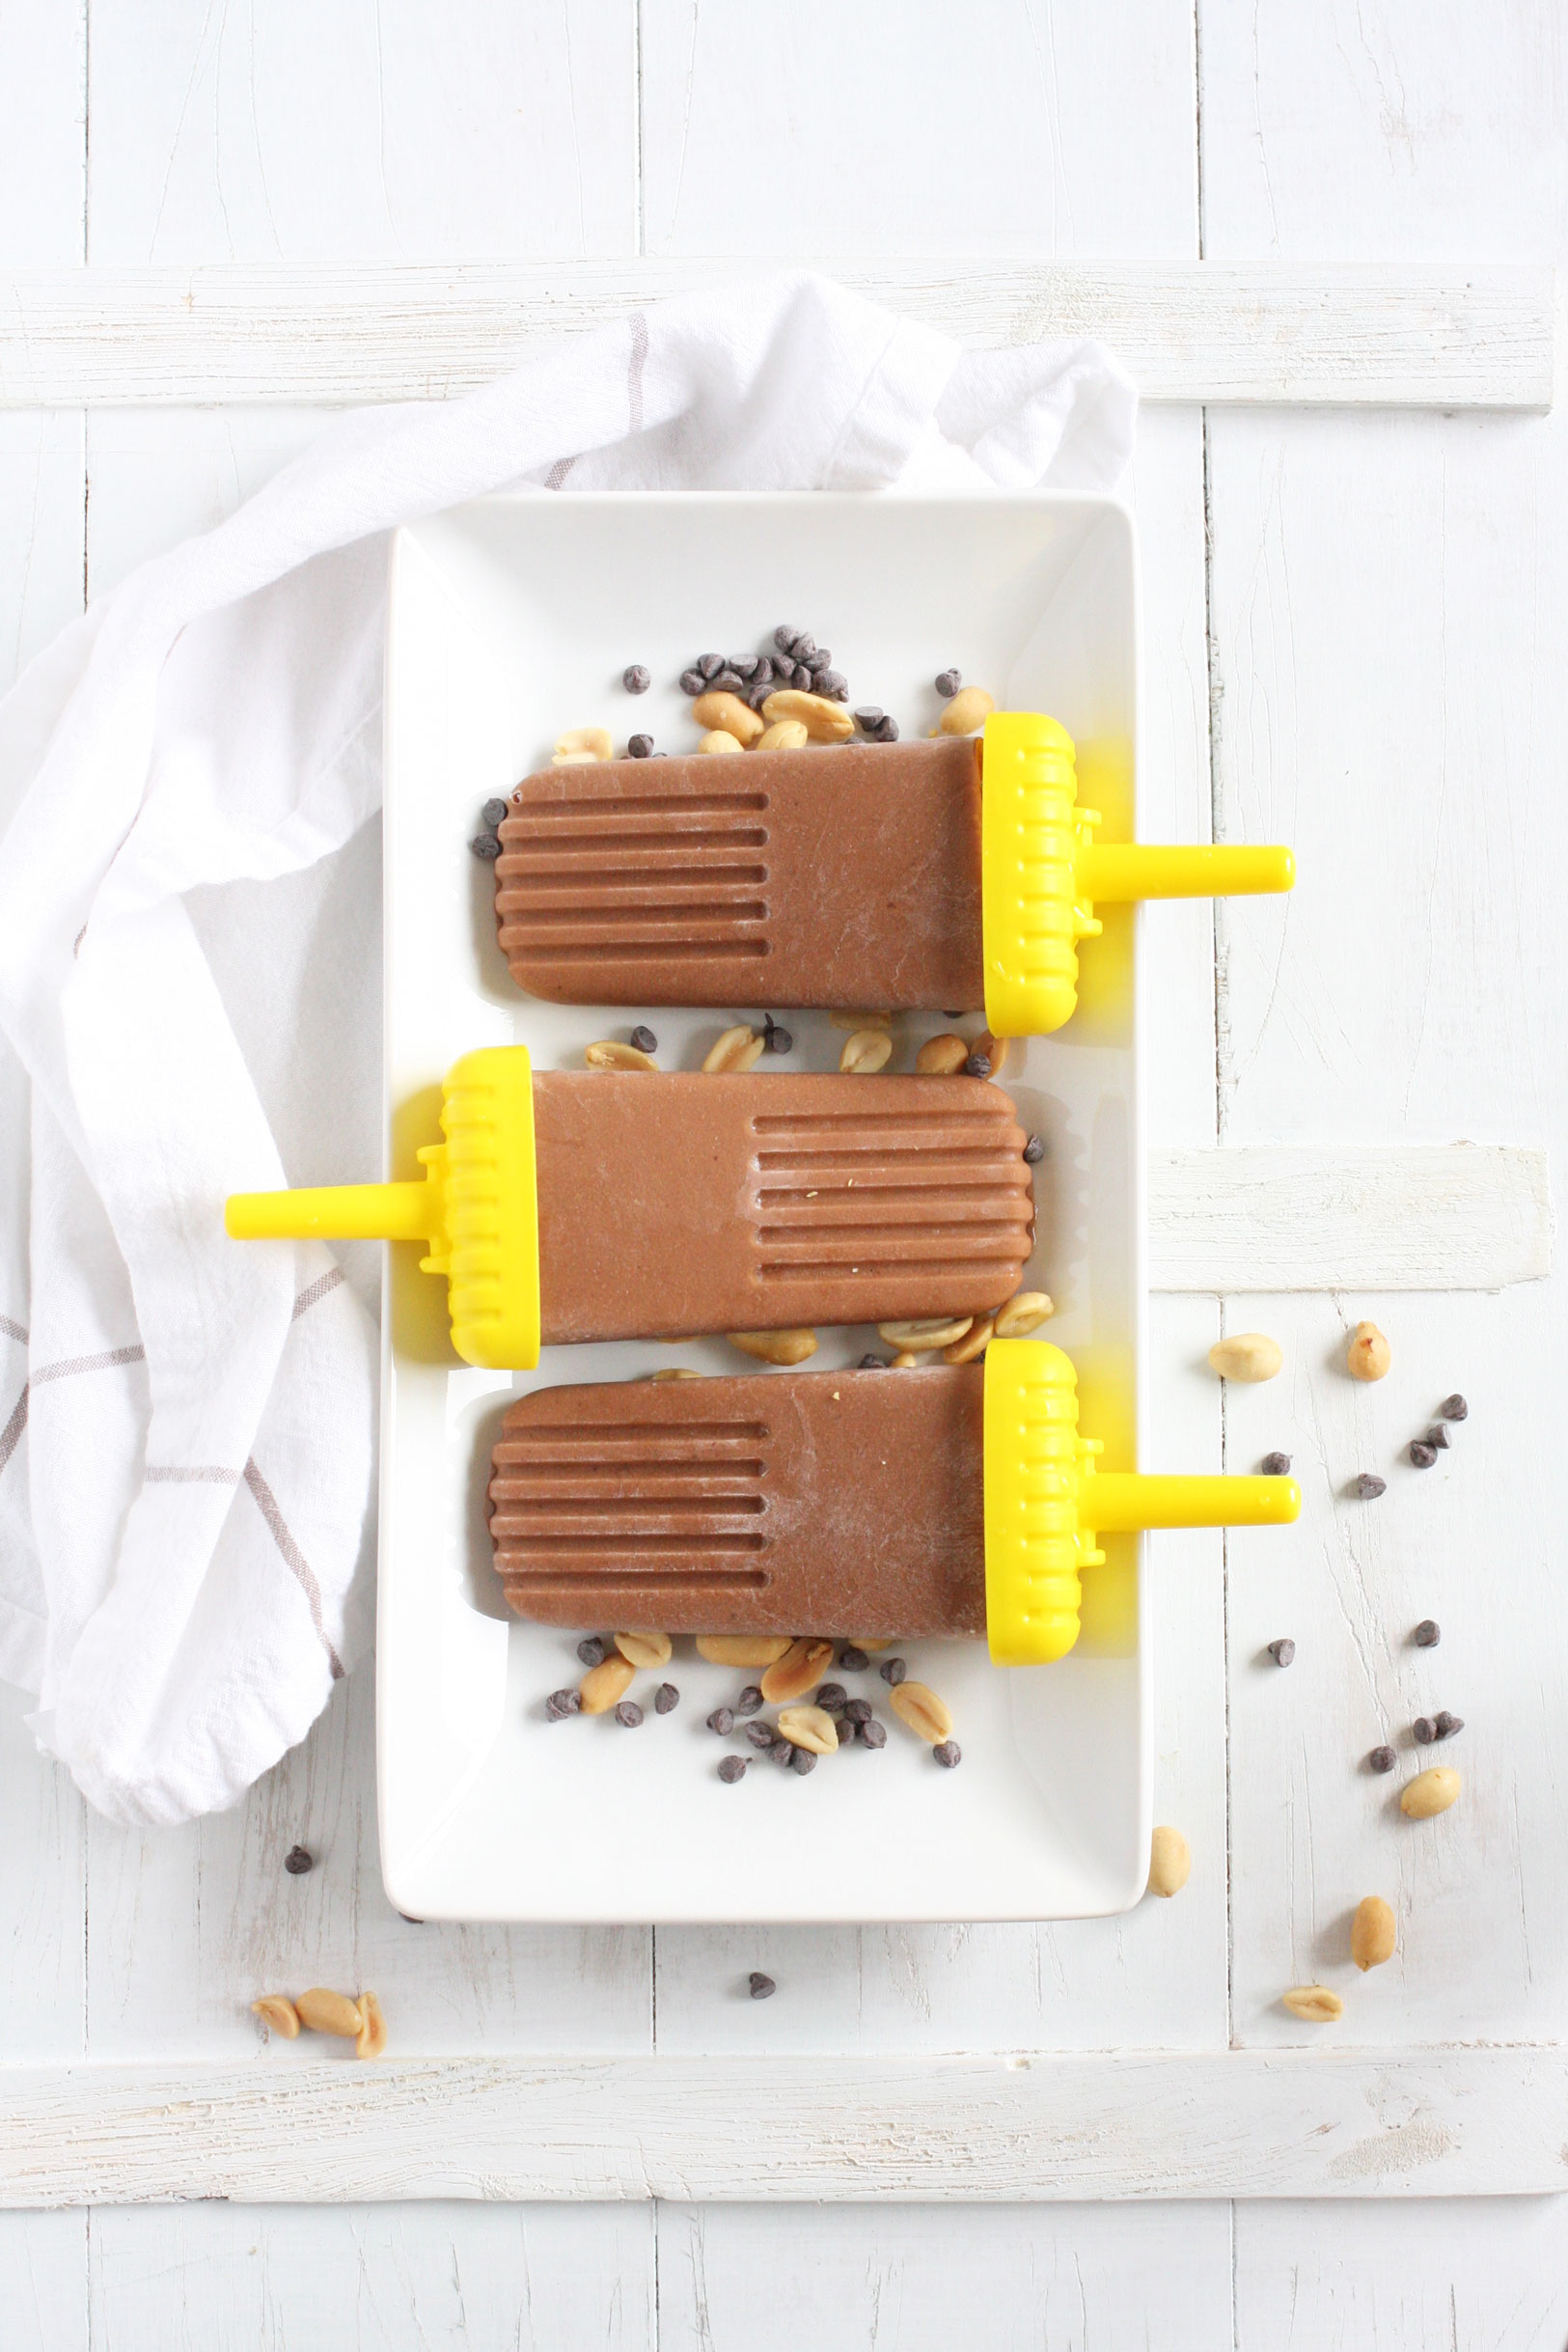 Skinny Chocolate Peanut Butter Popsicles // These popsicles are made with only four ingredients, come in at about 100 calories each, and are a great way to cool down in the summer heat.